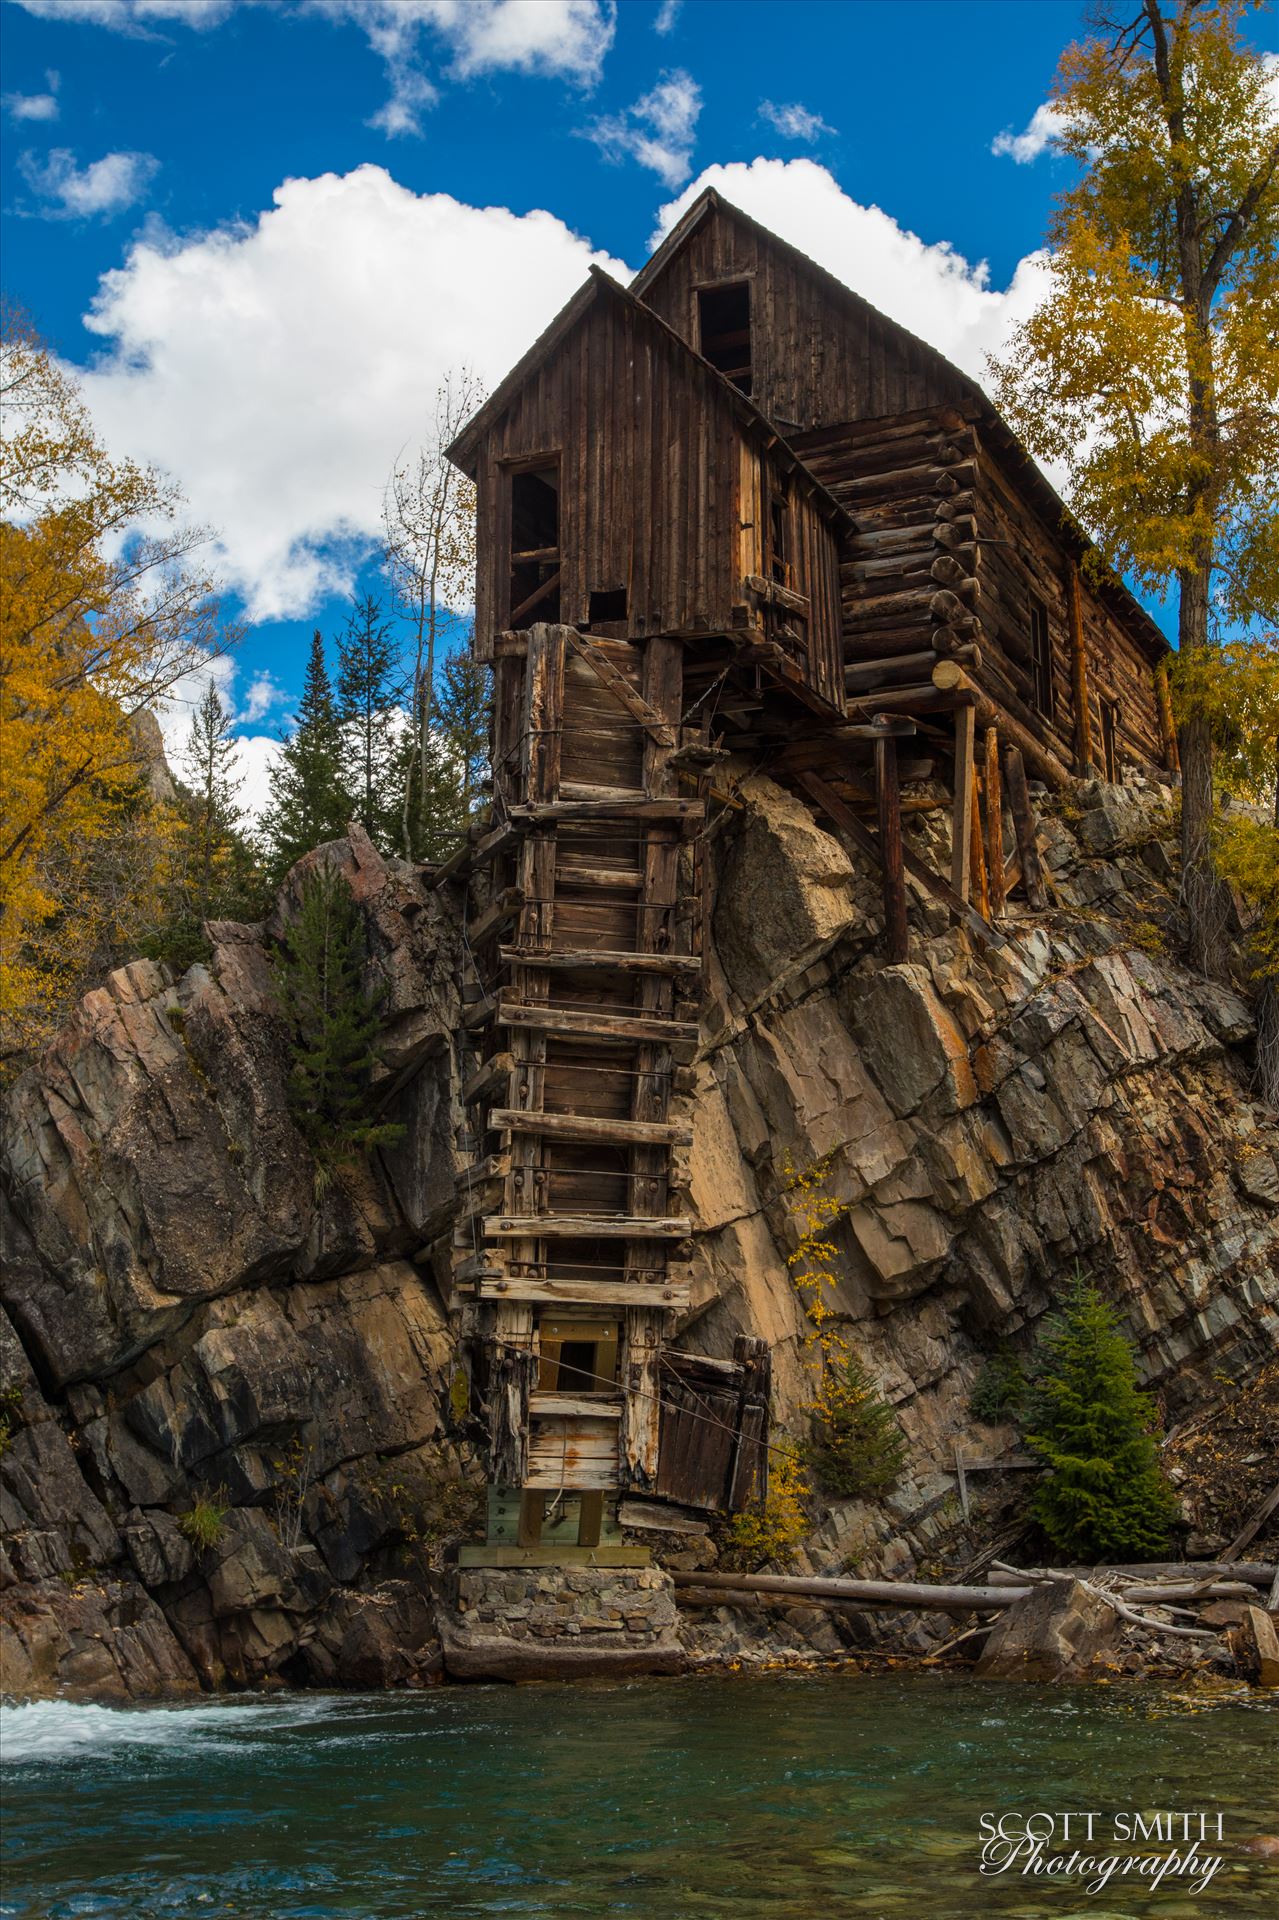 Crystal Mill, Colorado 13 The Crystal Mill, or the Old Mill is an 1892 wooden powerhouse located on an outcrop above the Crystal River in Crystal, Colorado by Scott Smith Photos